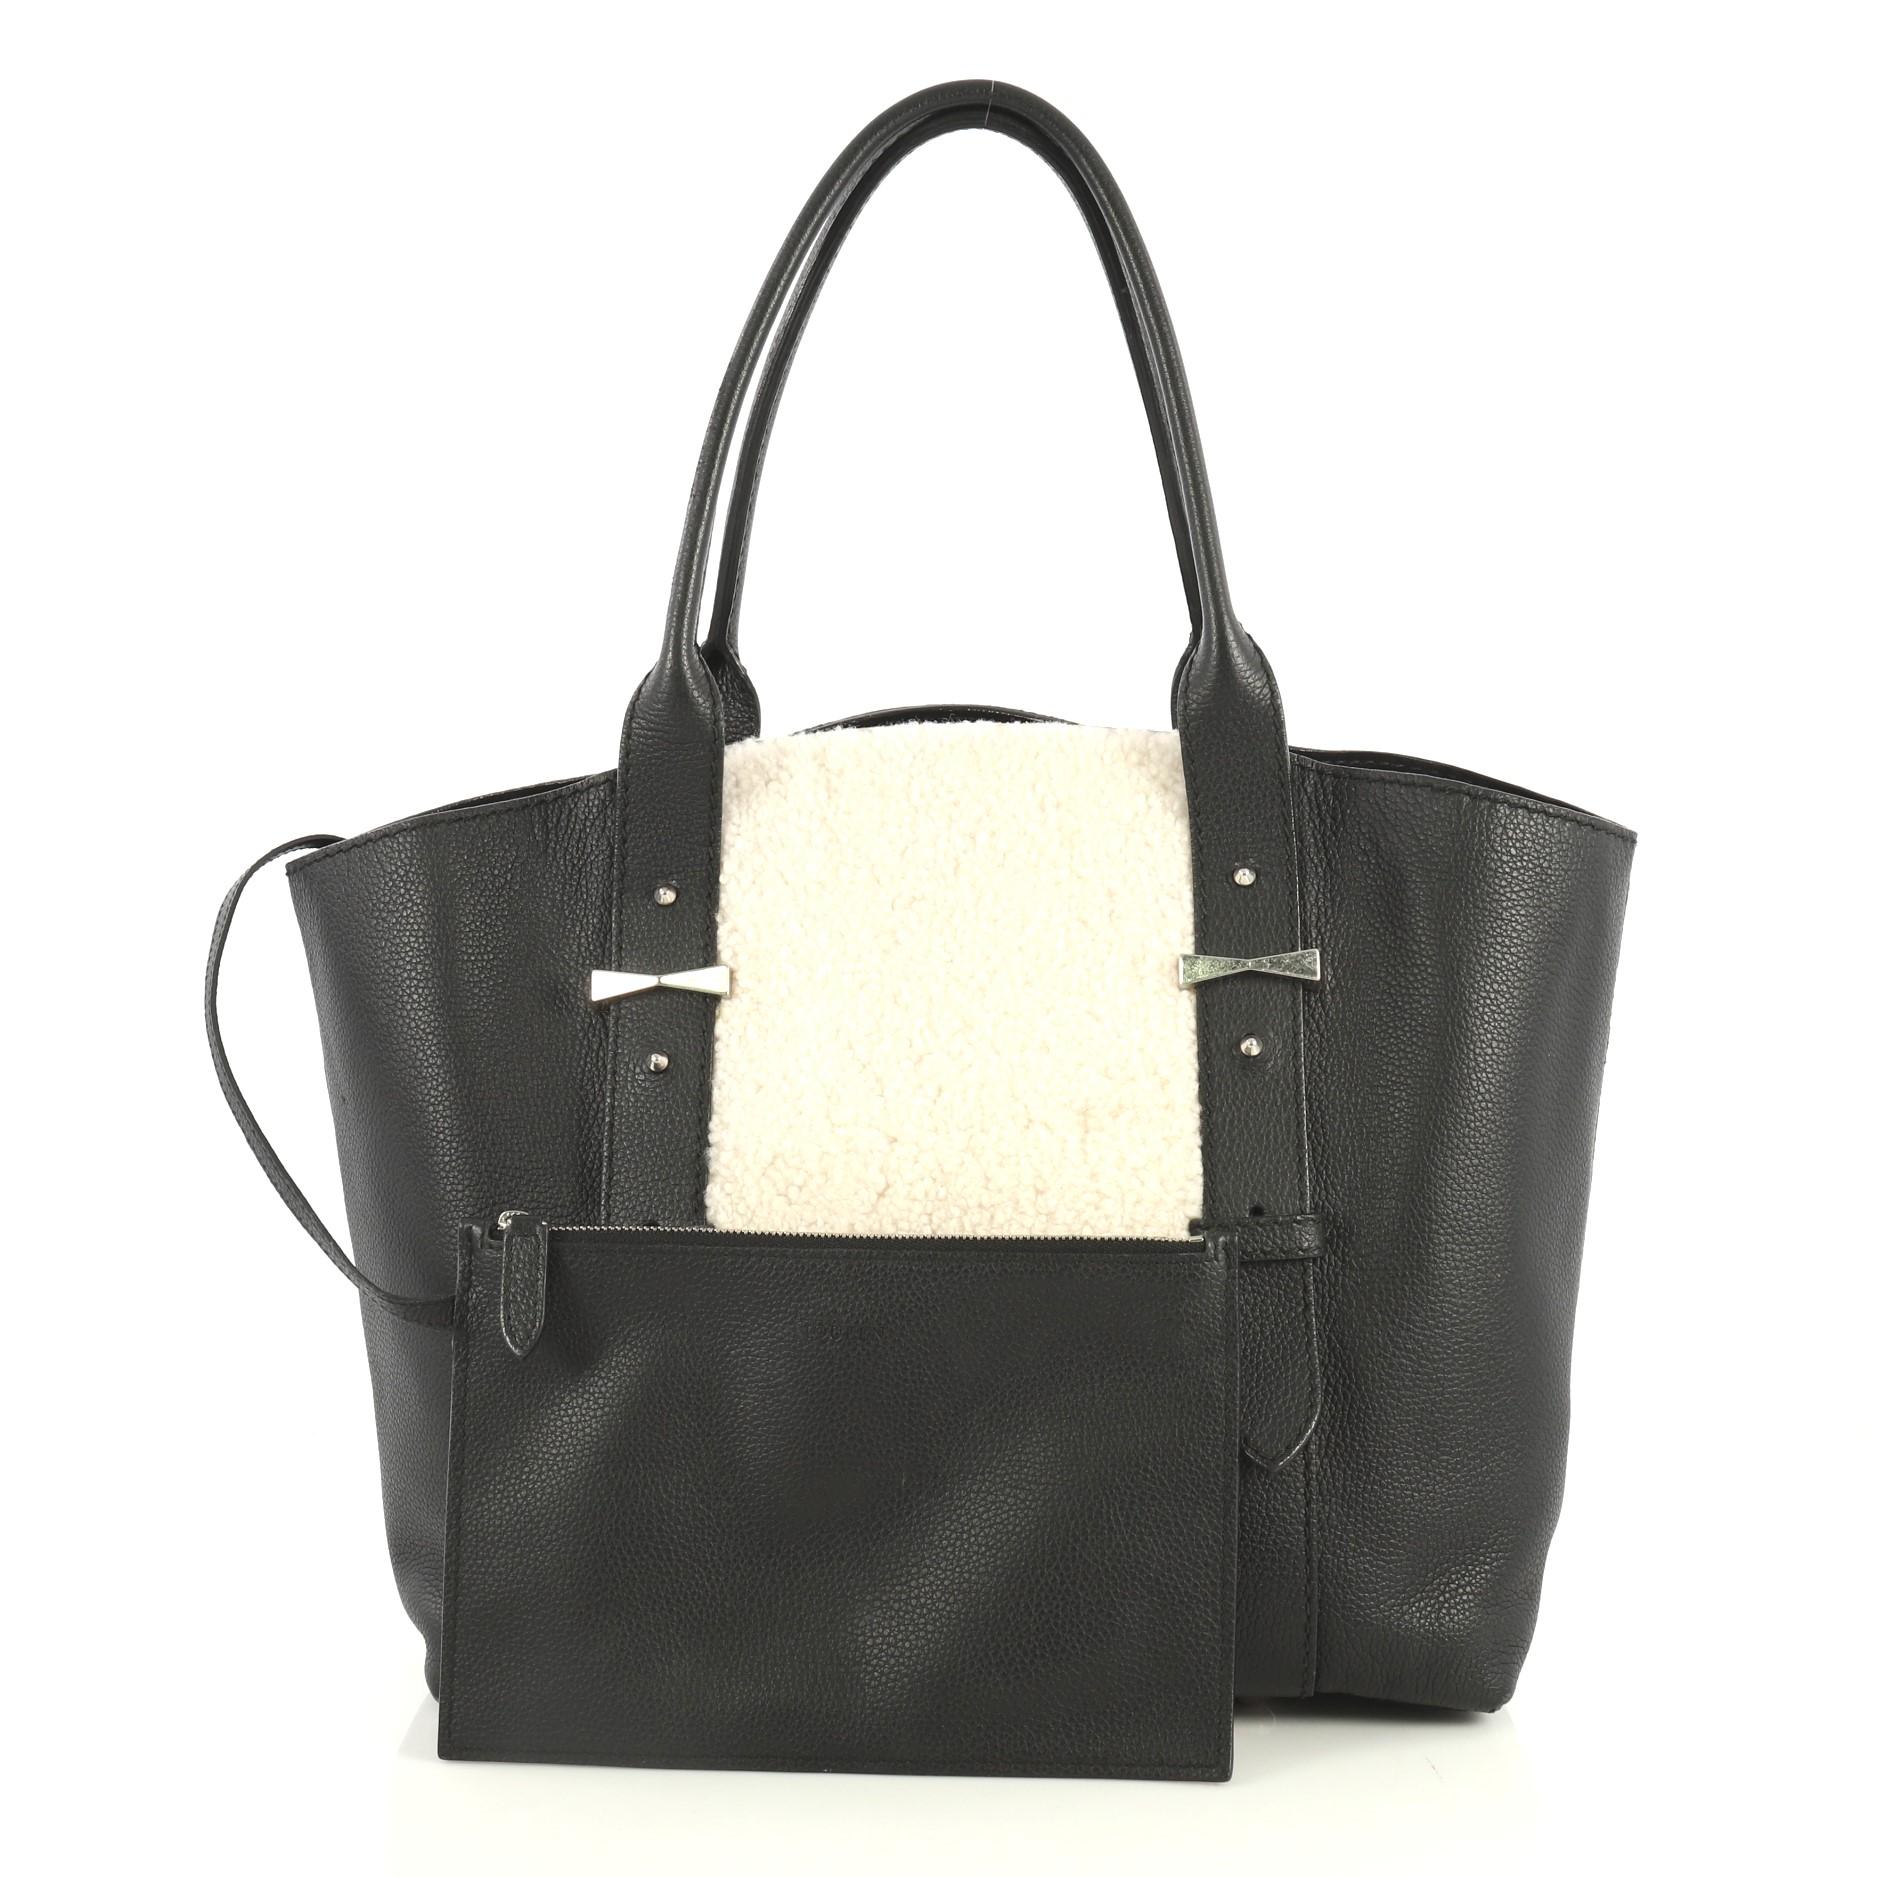 This Alexander McQueen Legend Tote Shearling with Leather Medium, crafted in black leather with white shearling, features dual rolled leather handles with belted leather details, protective base studs and silver-tone hardware. Its wide top opening